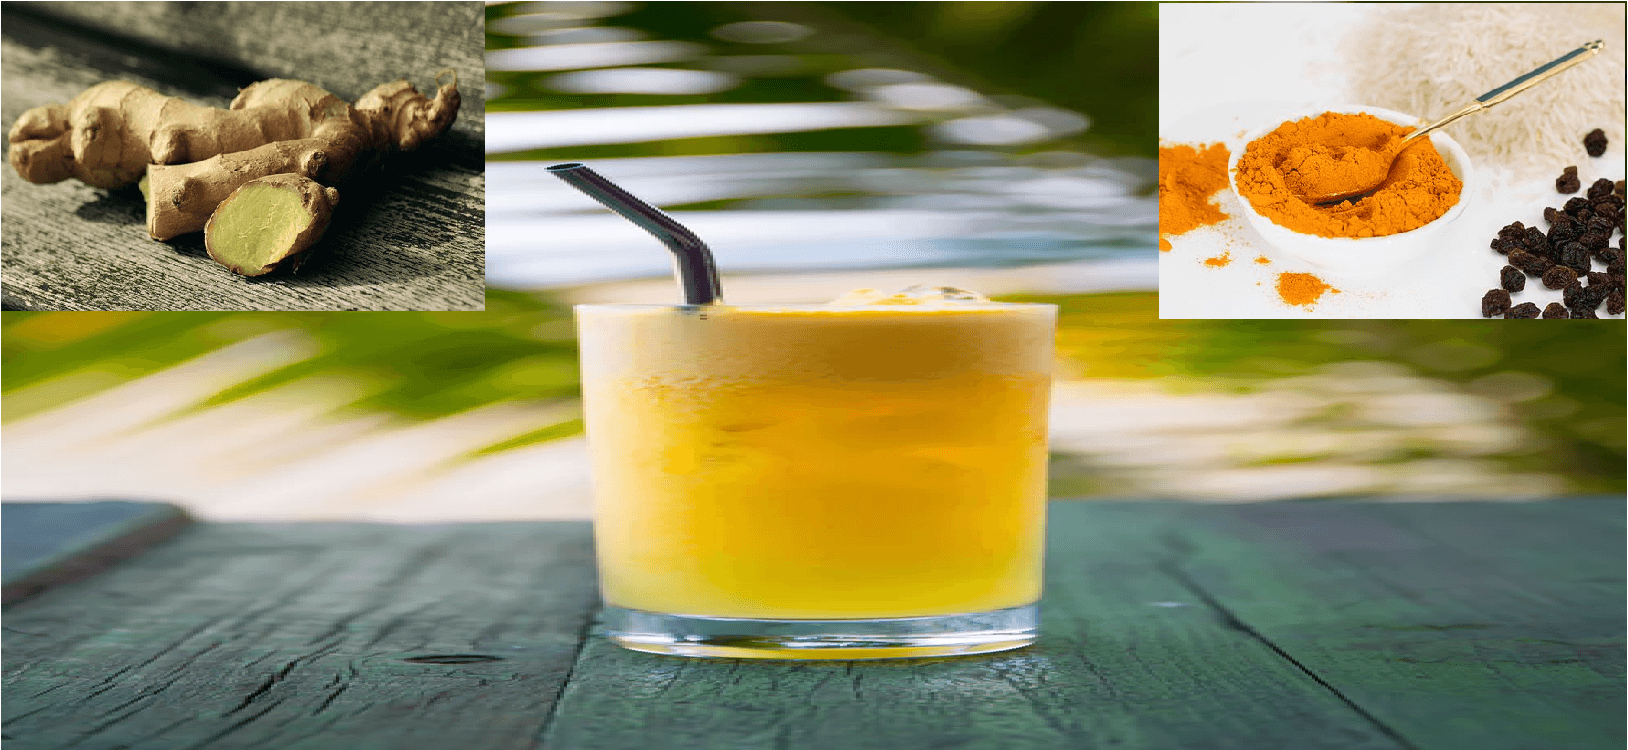 Homemade Turmeric & Ginger Iced Tea for Your Heart, Brain, and Cells